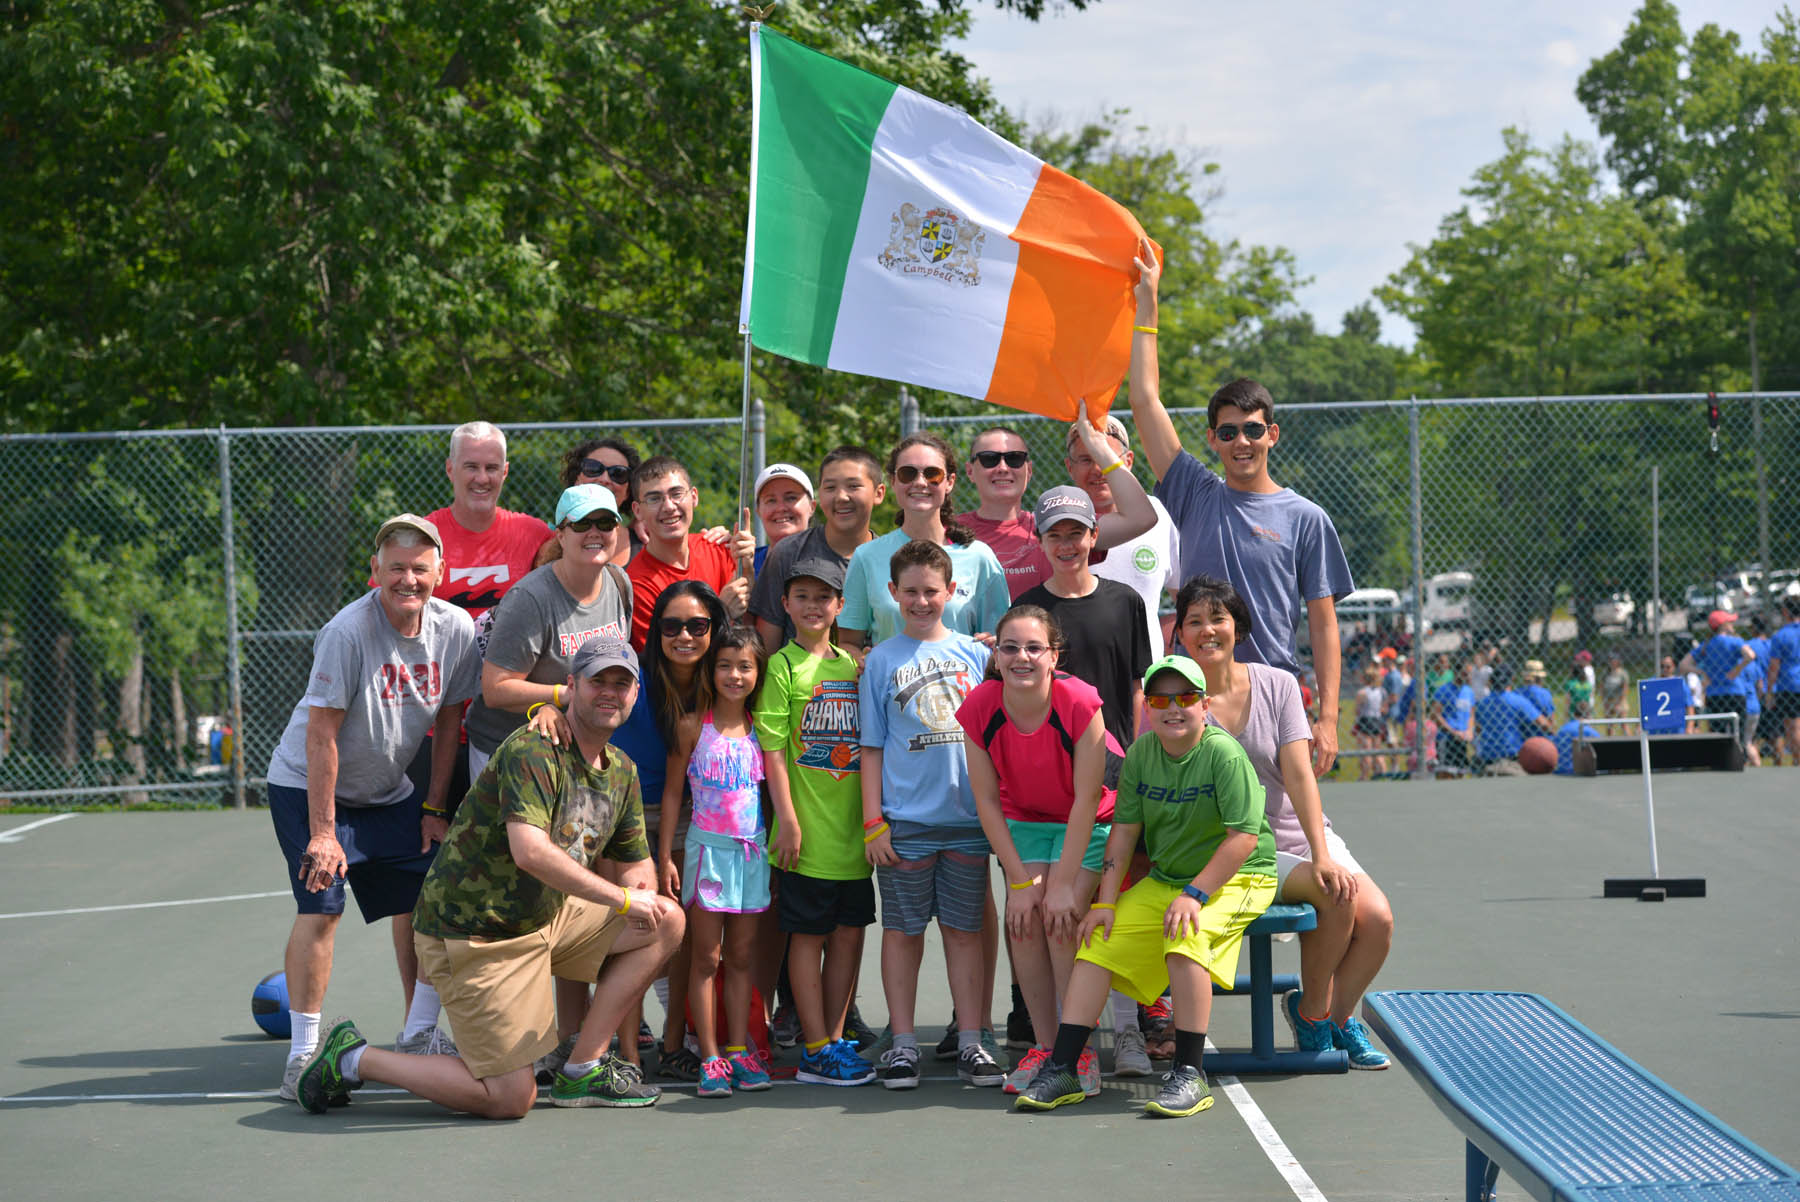 Family photo with Irish Flag and Campbell crest.